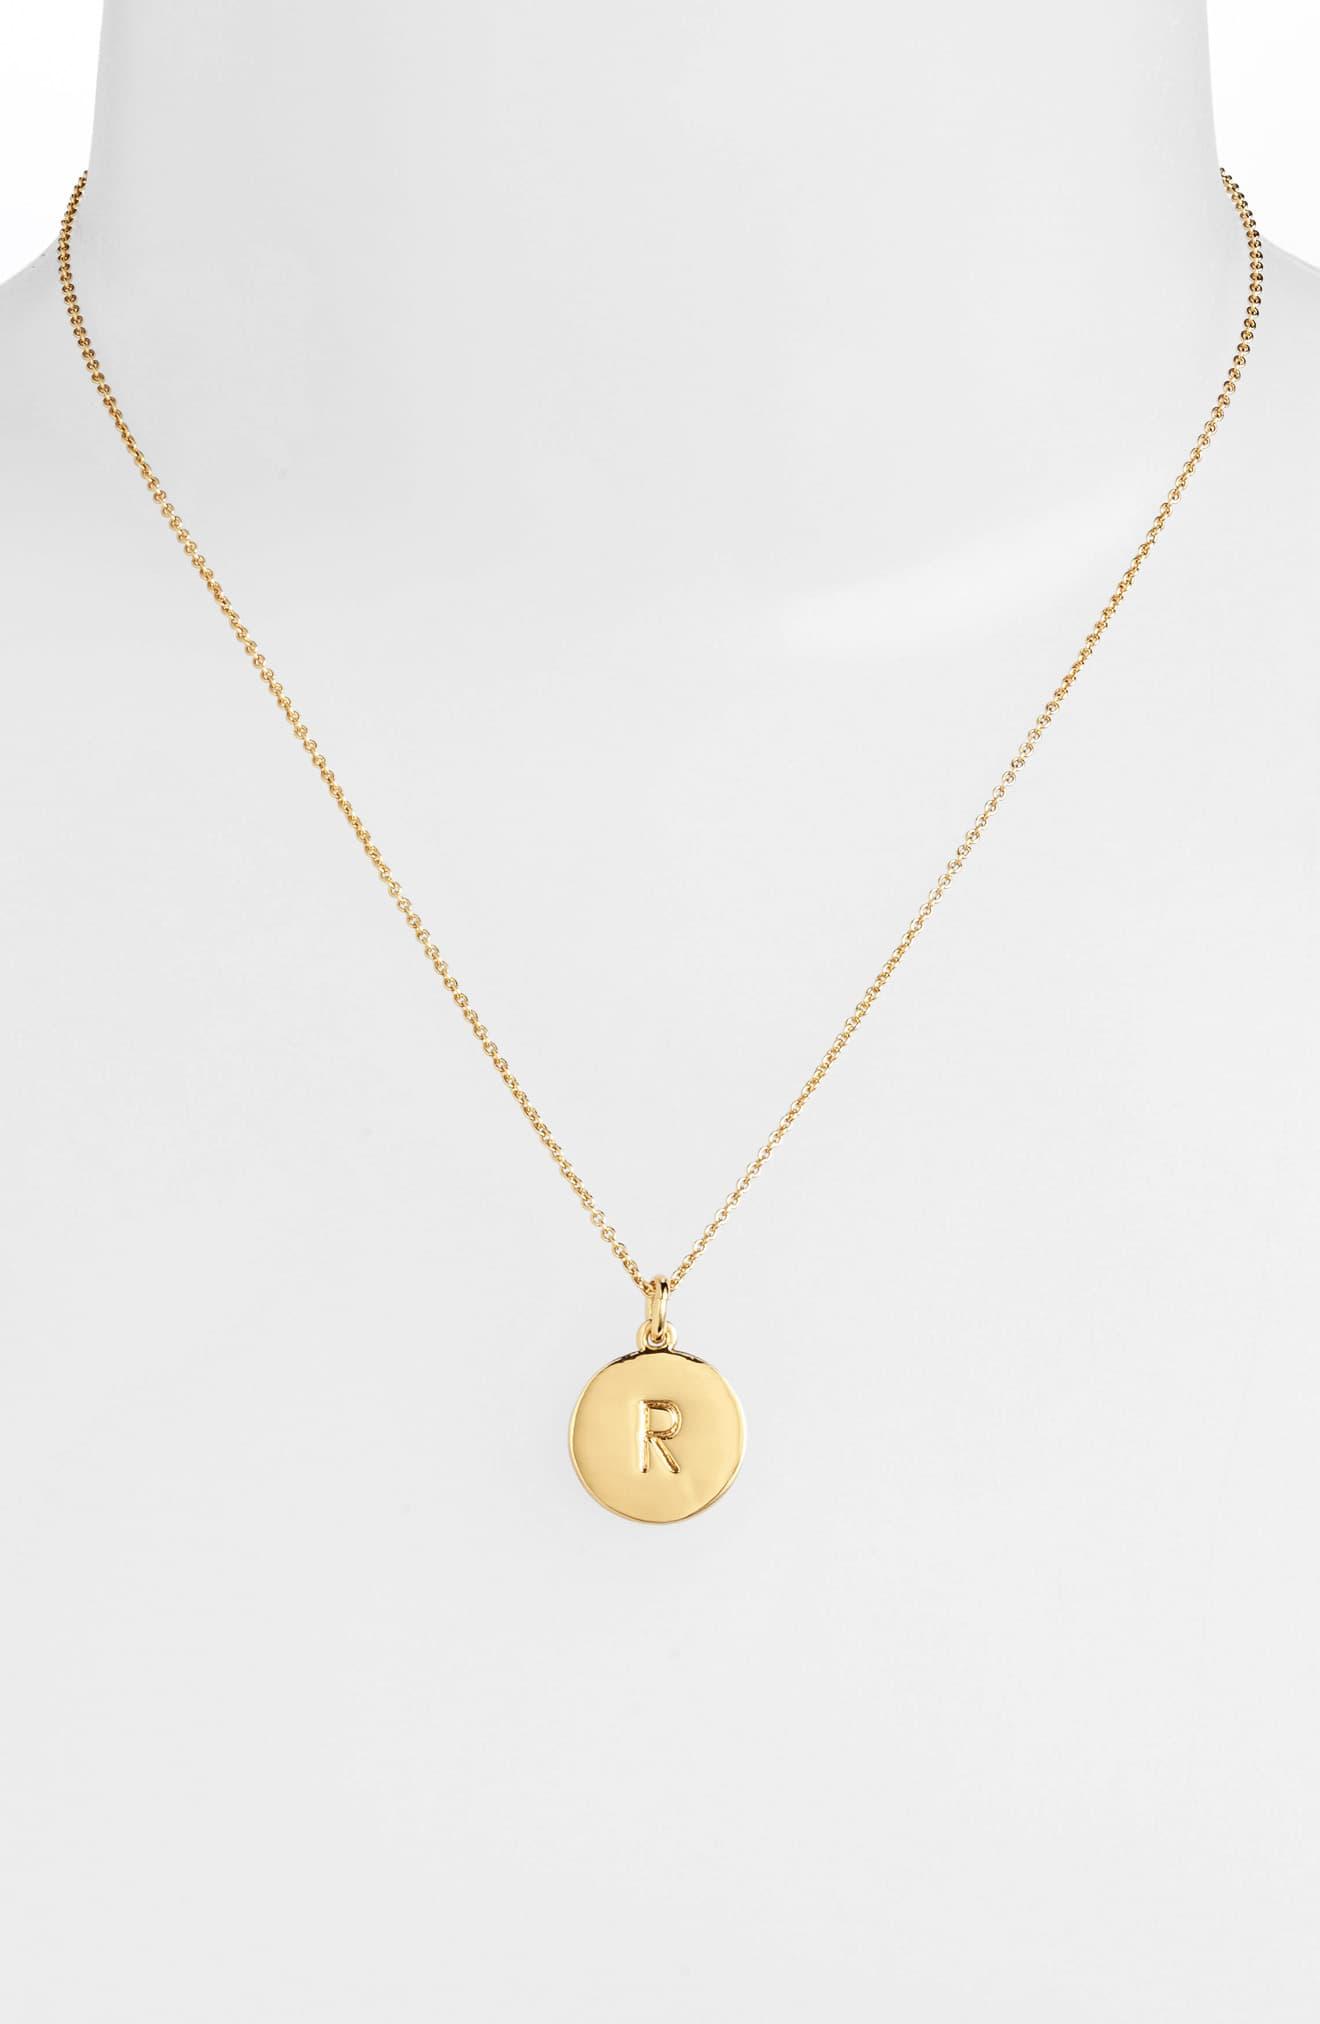 Kate Spade One In A Million Initial Pendant Necklace in r ...